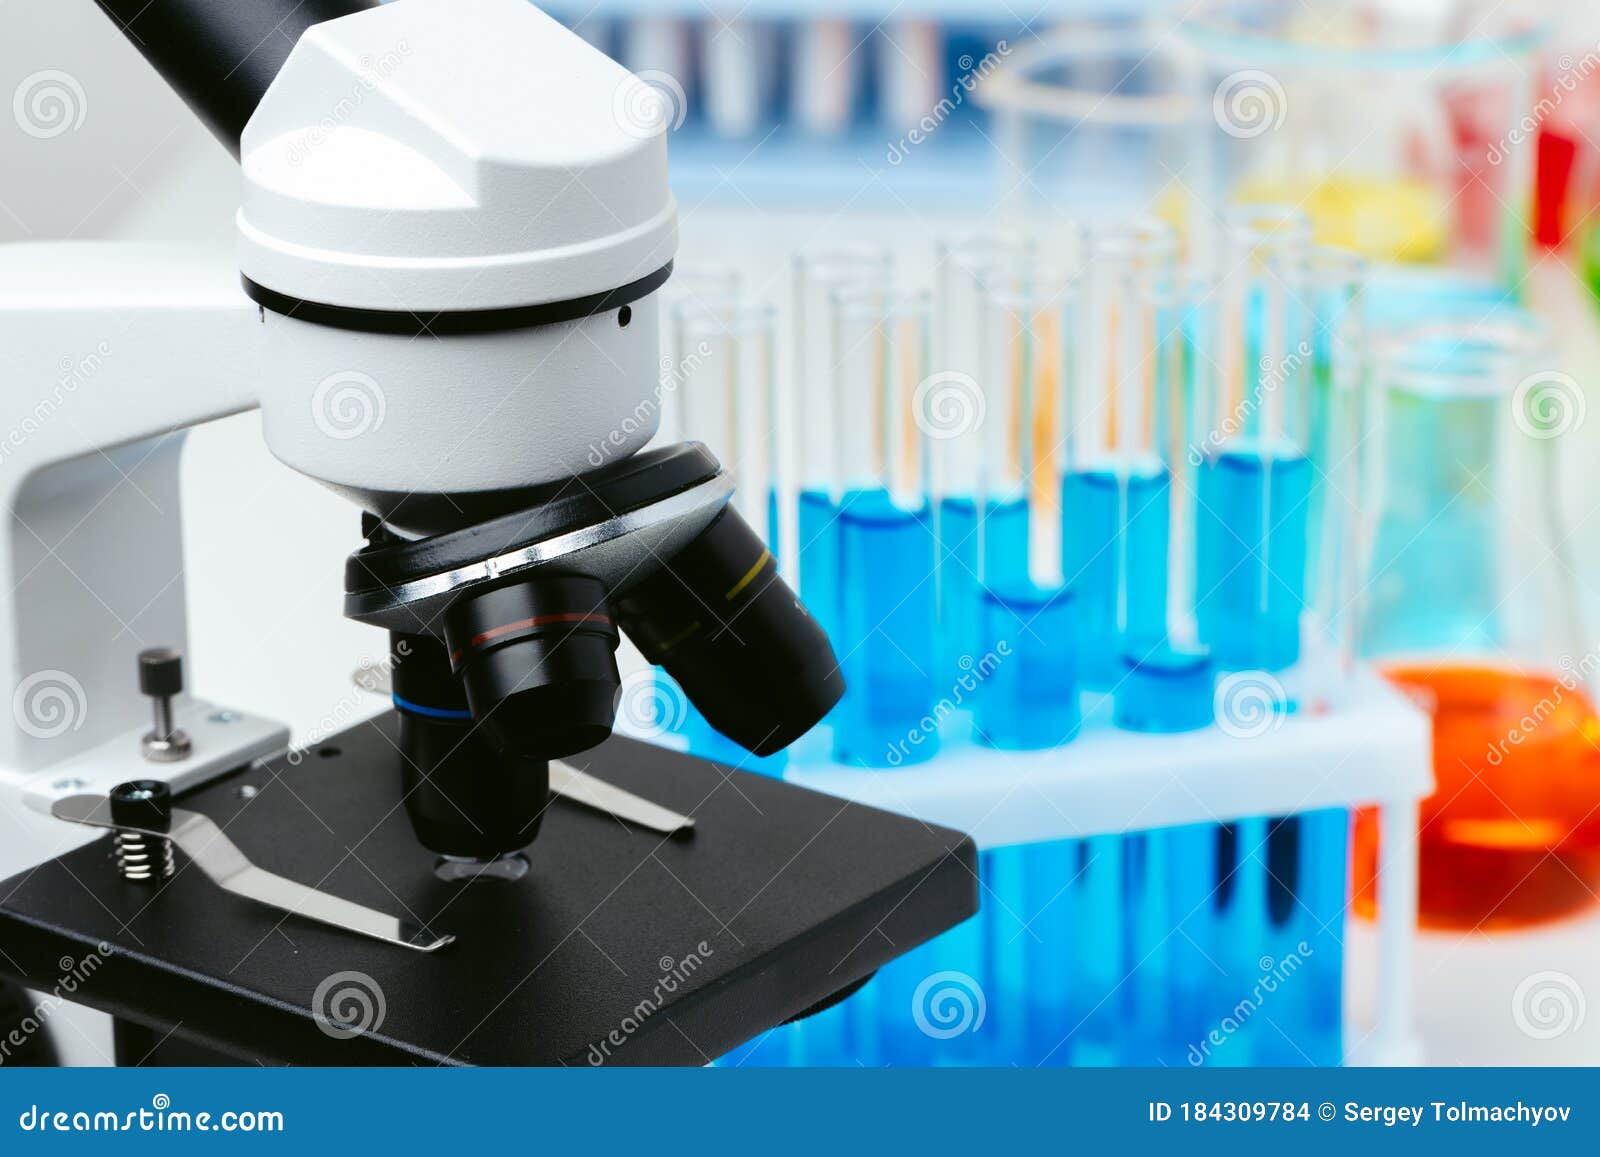 Microscope and Test Tubes on Table in Laboratory, Close Up Stock Photo ...